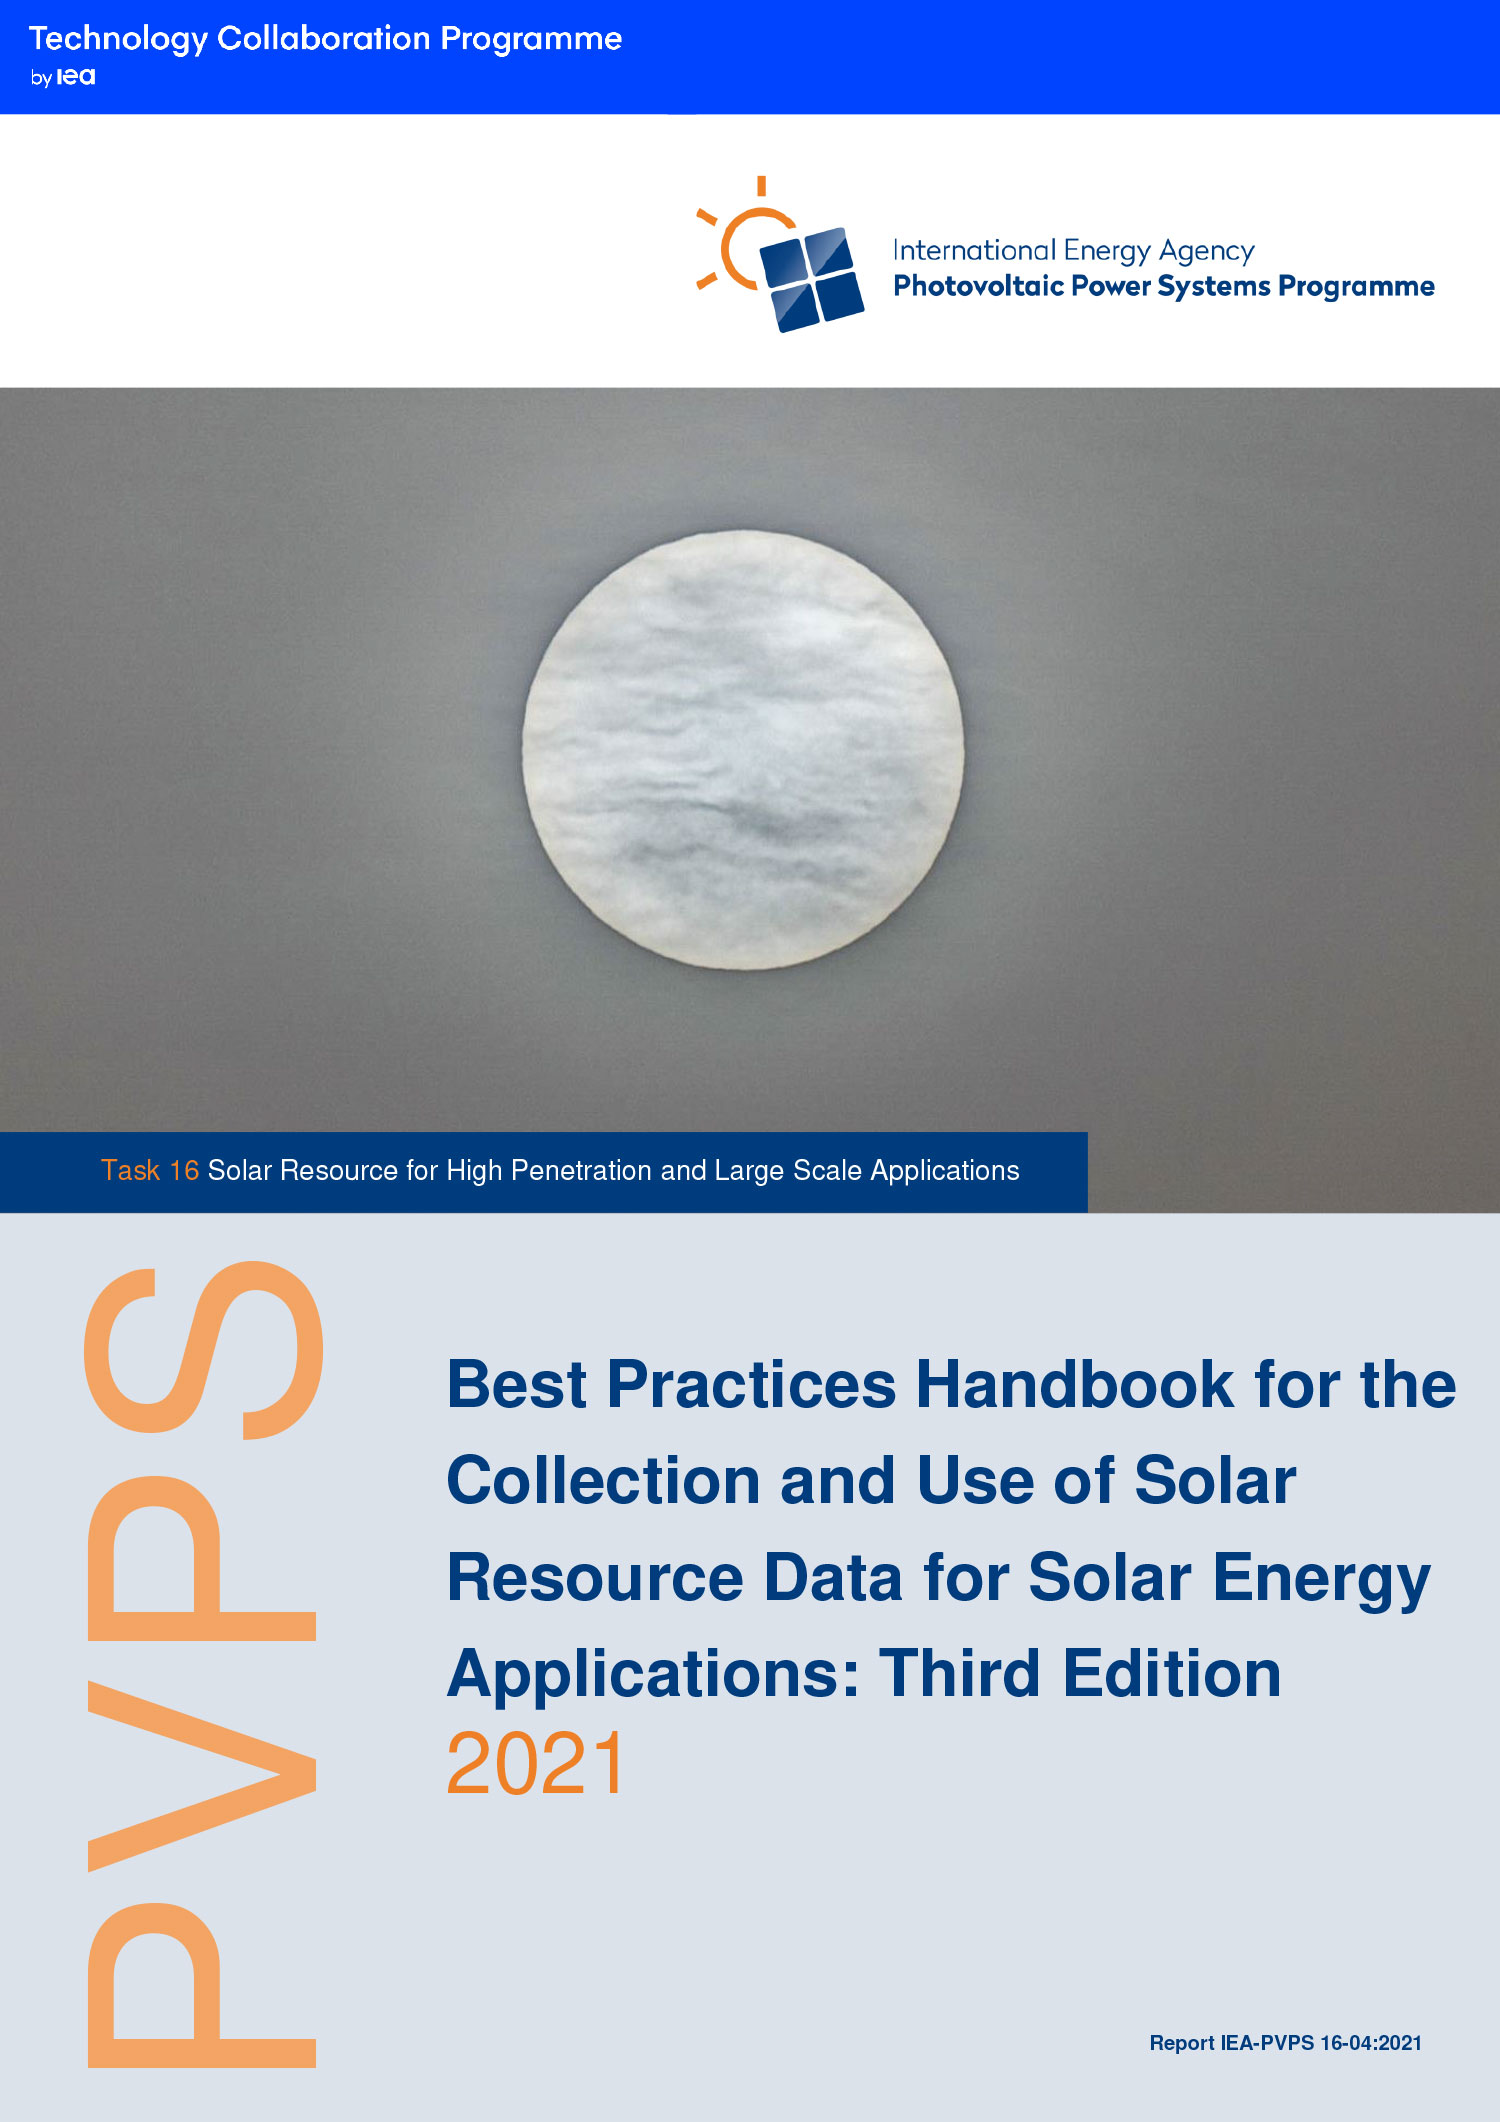 Guidelines and recommendations ("best practices") are published in the IEA PVPS Best practices Handbook.